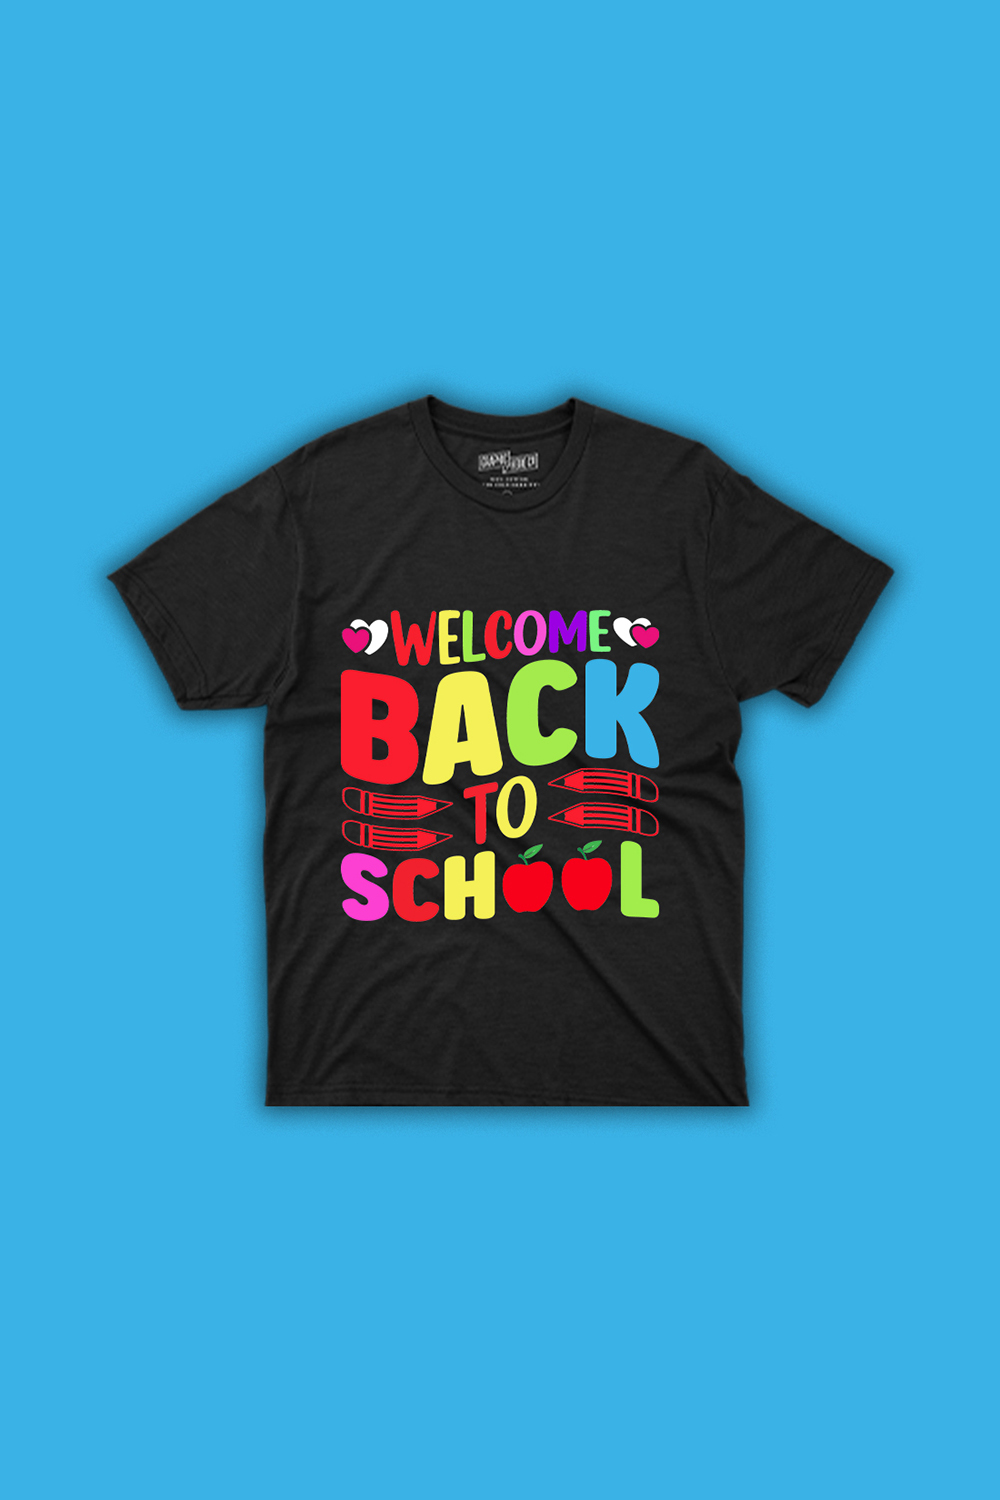 Image of a T-shirt with a colorful inscription Welcome Back To School